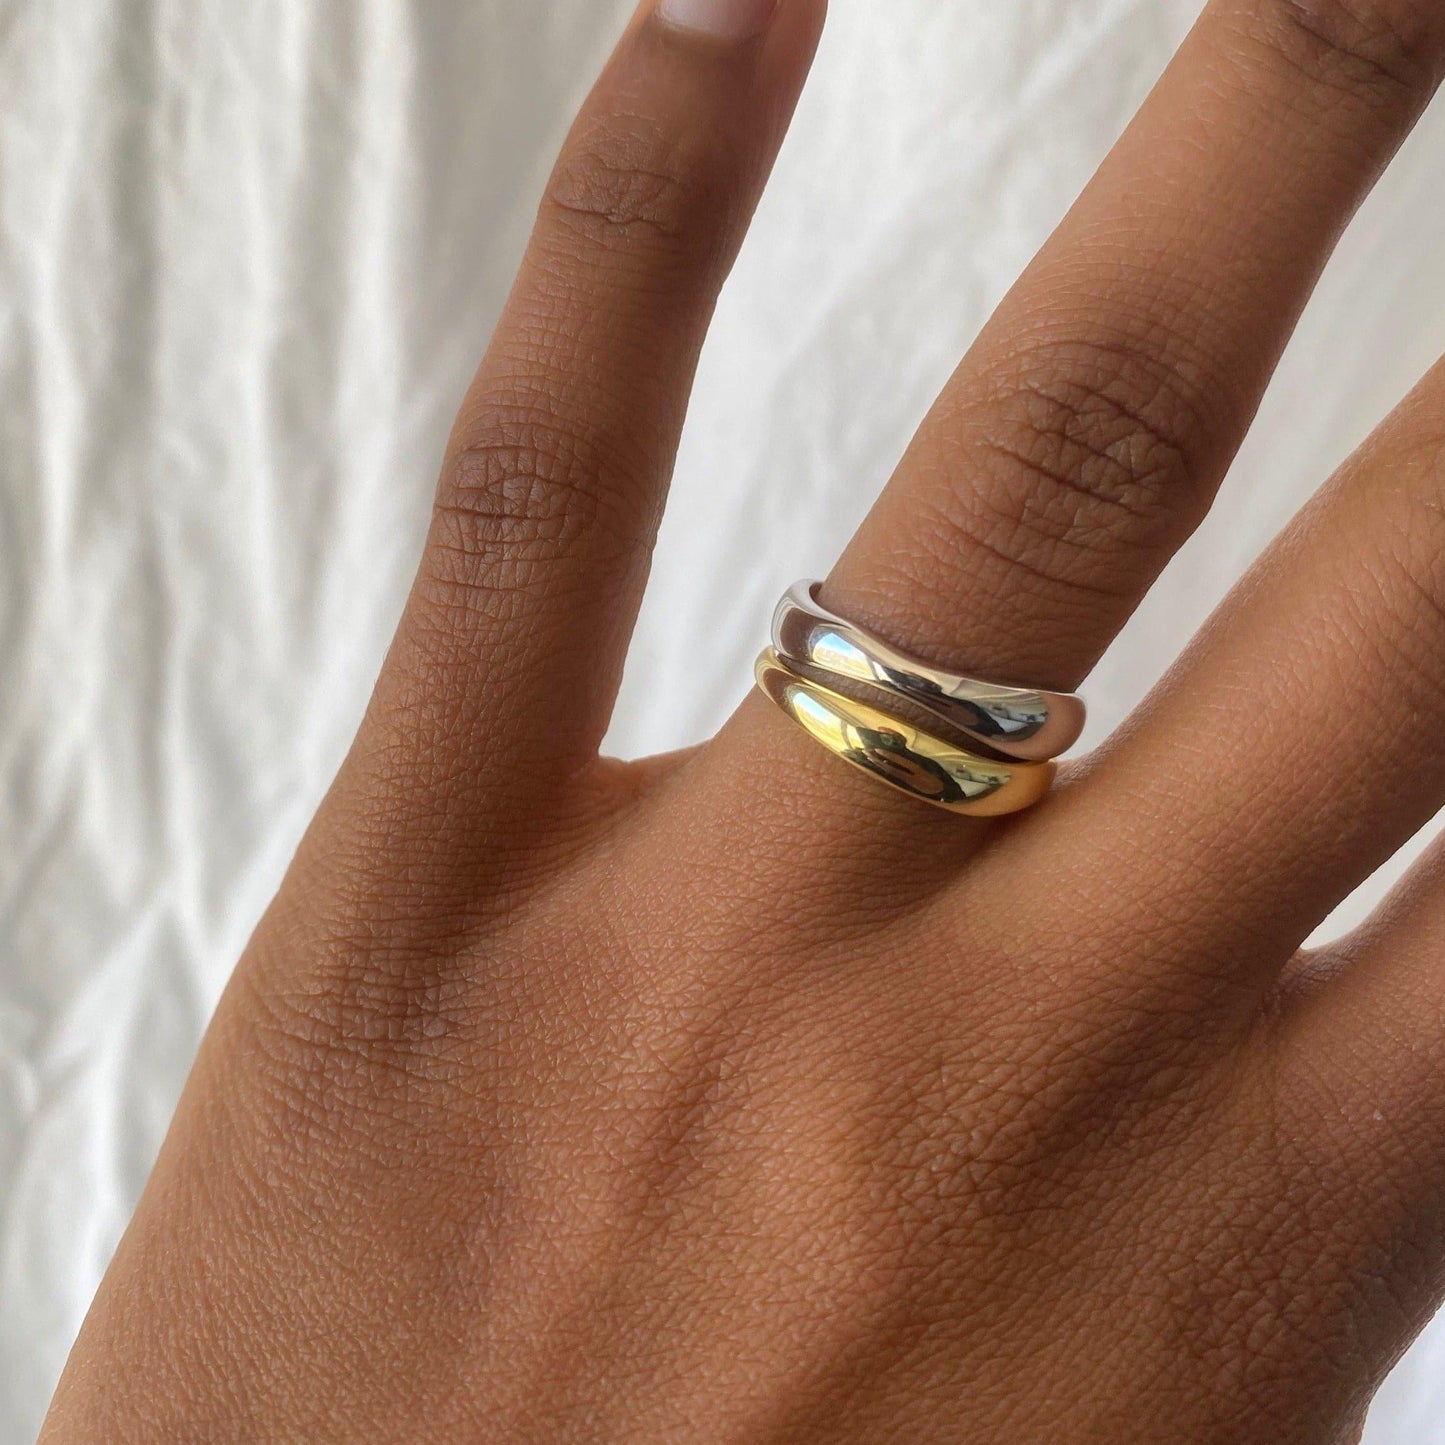 THE COCO RING - 18k gold plated